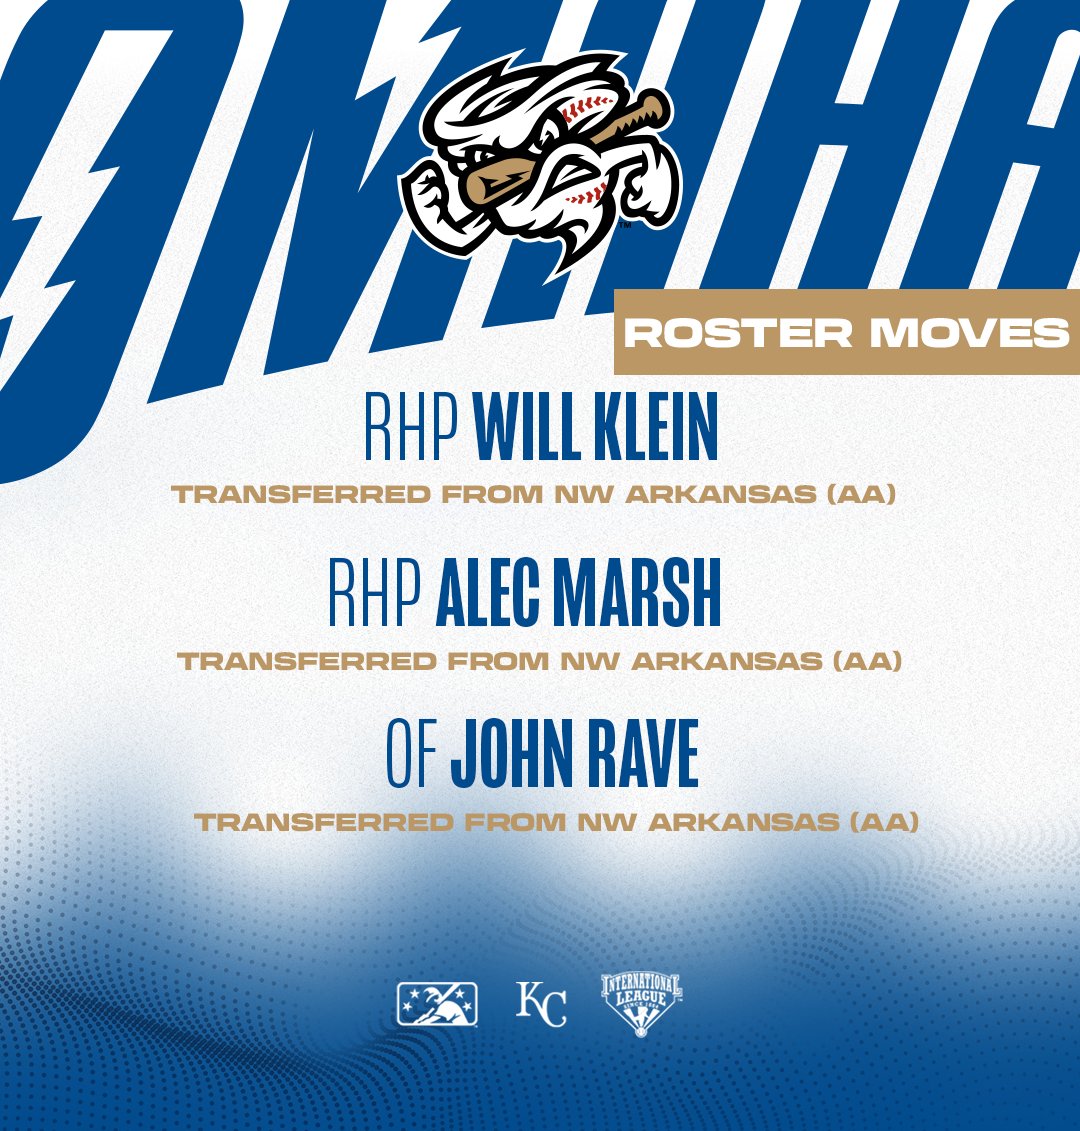 RHP Will Klein was transferred to Omaha from NW Arkansas (AA)

RHP Alec Marsh was transferred to Omaha from NW Arkansas (AA)

OF John Rave was transferred to Omaha from NW Arkansas (AA)